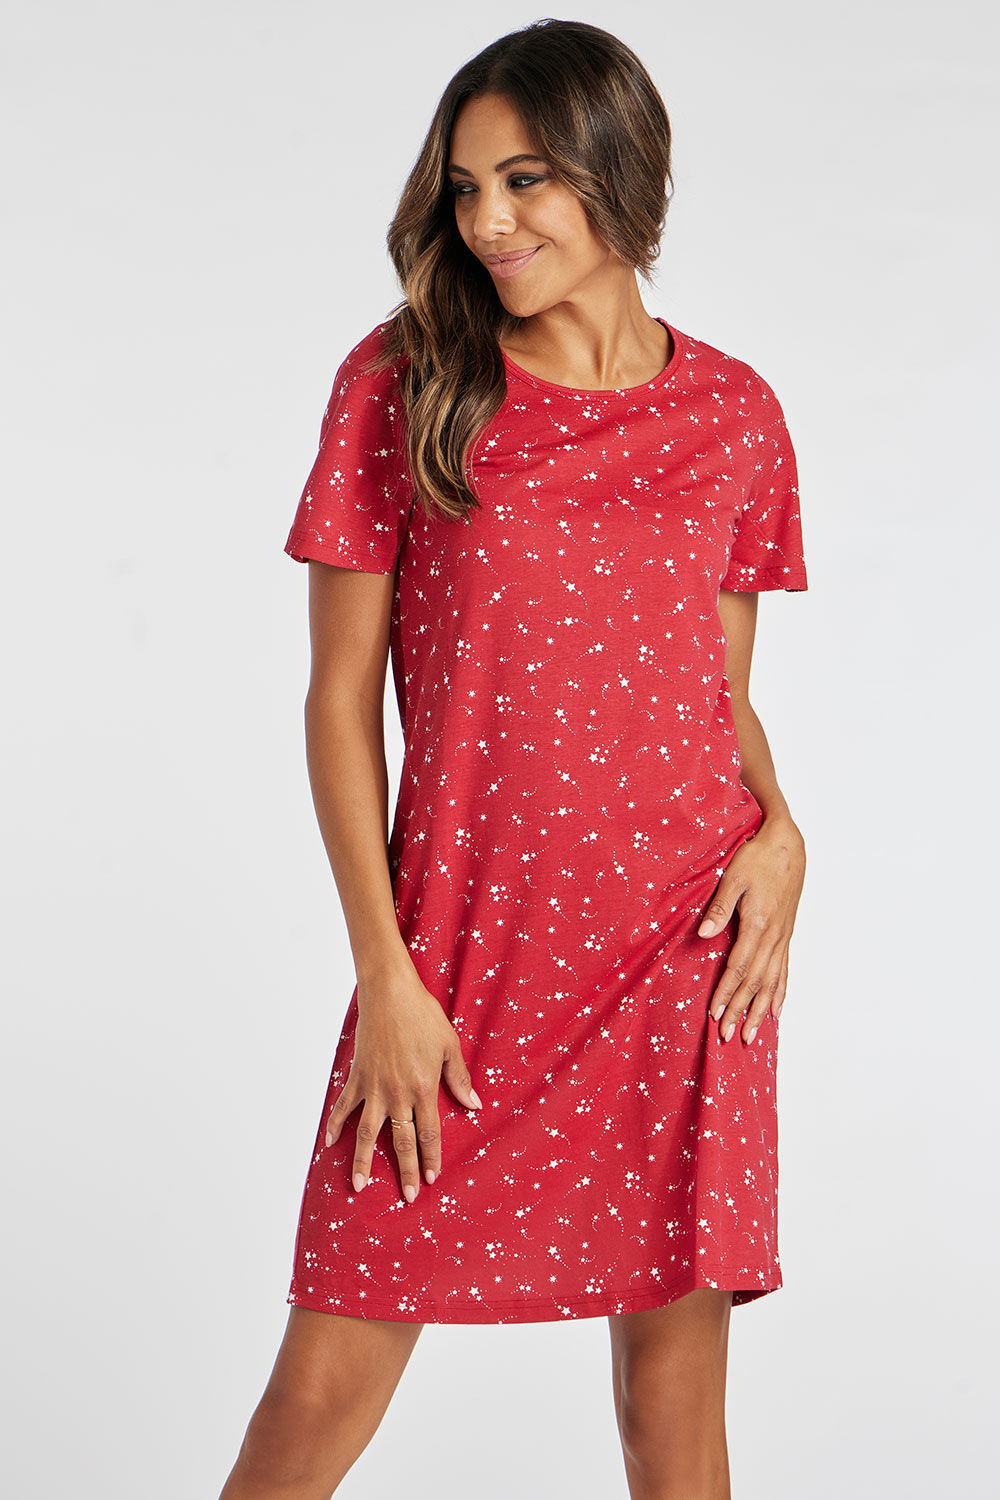 Bonmarche Red All Over Star Print Nightdress, Size: 16-18